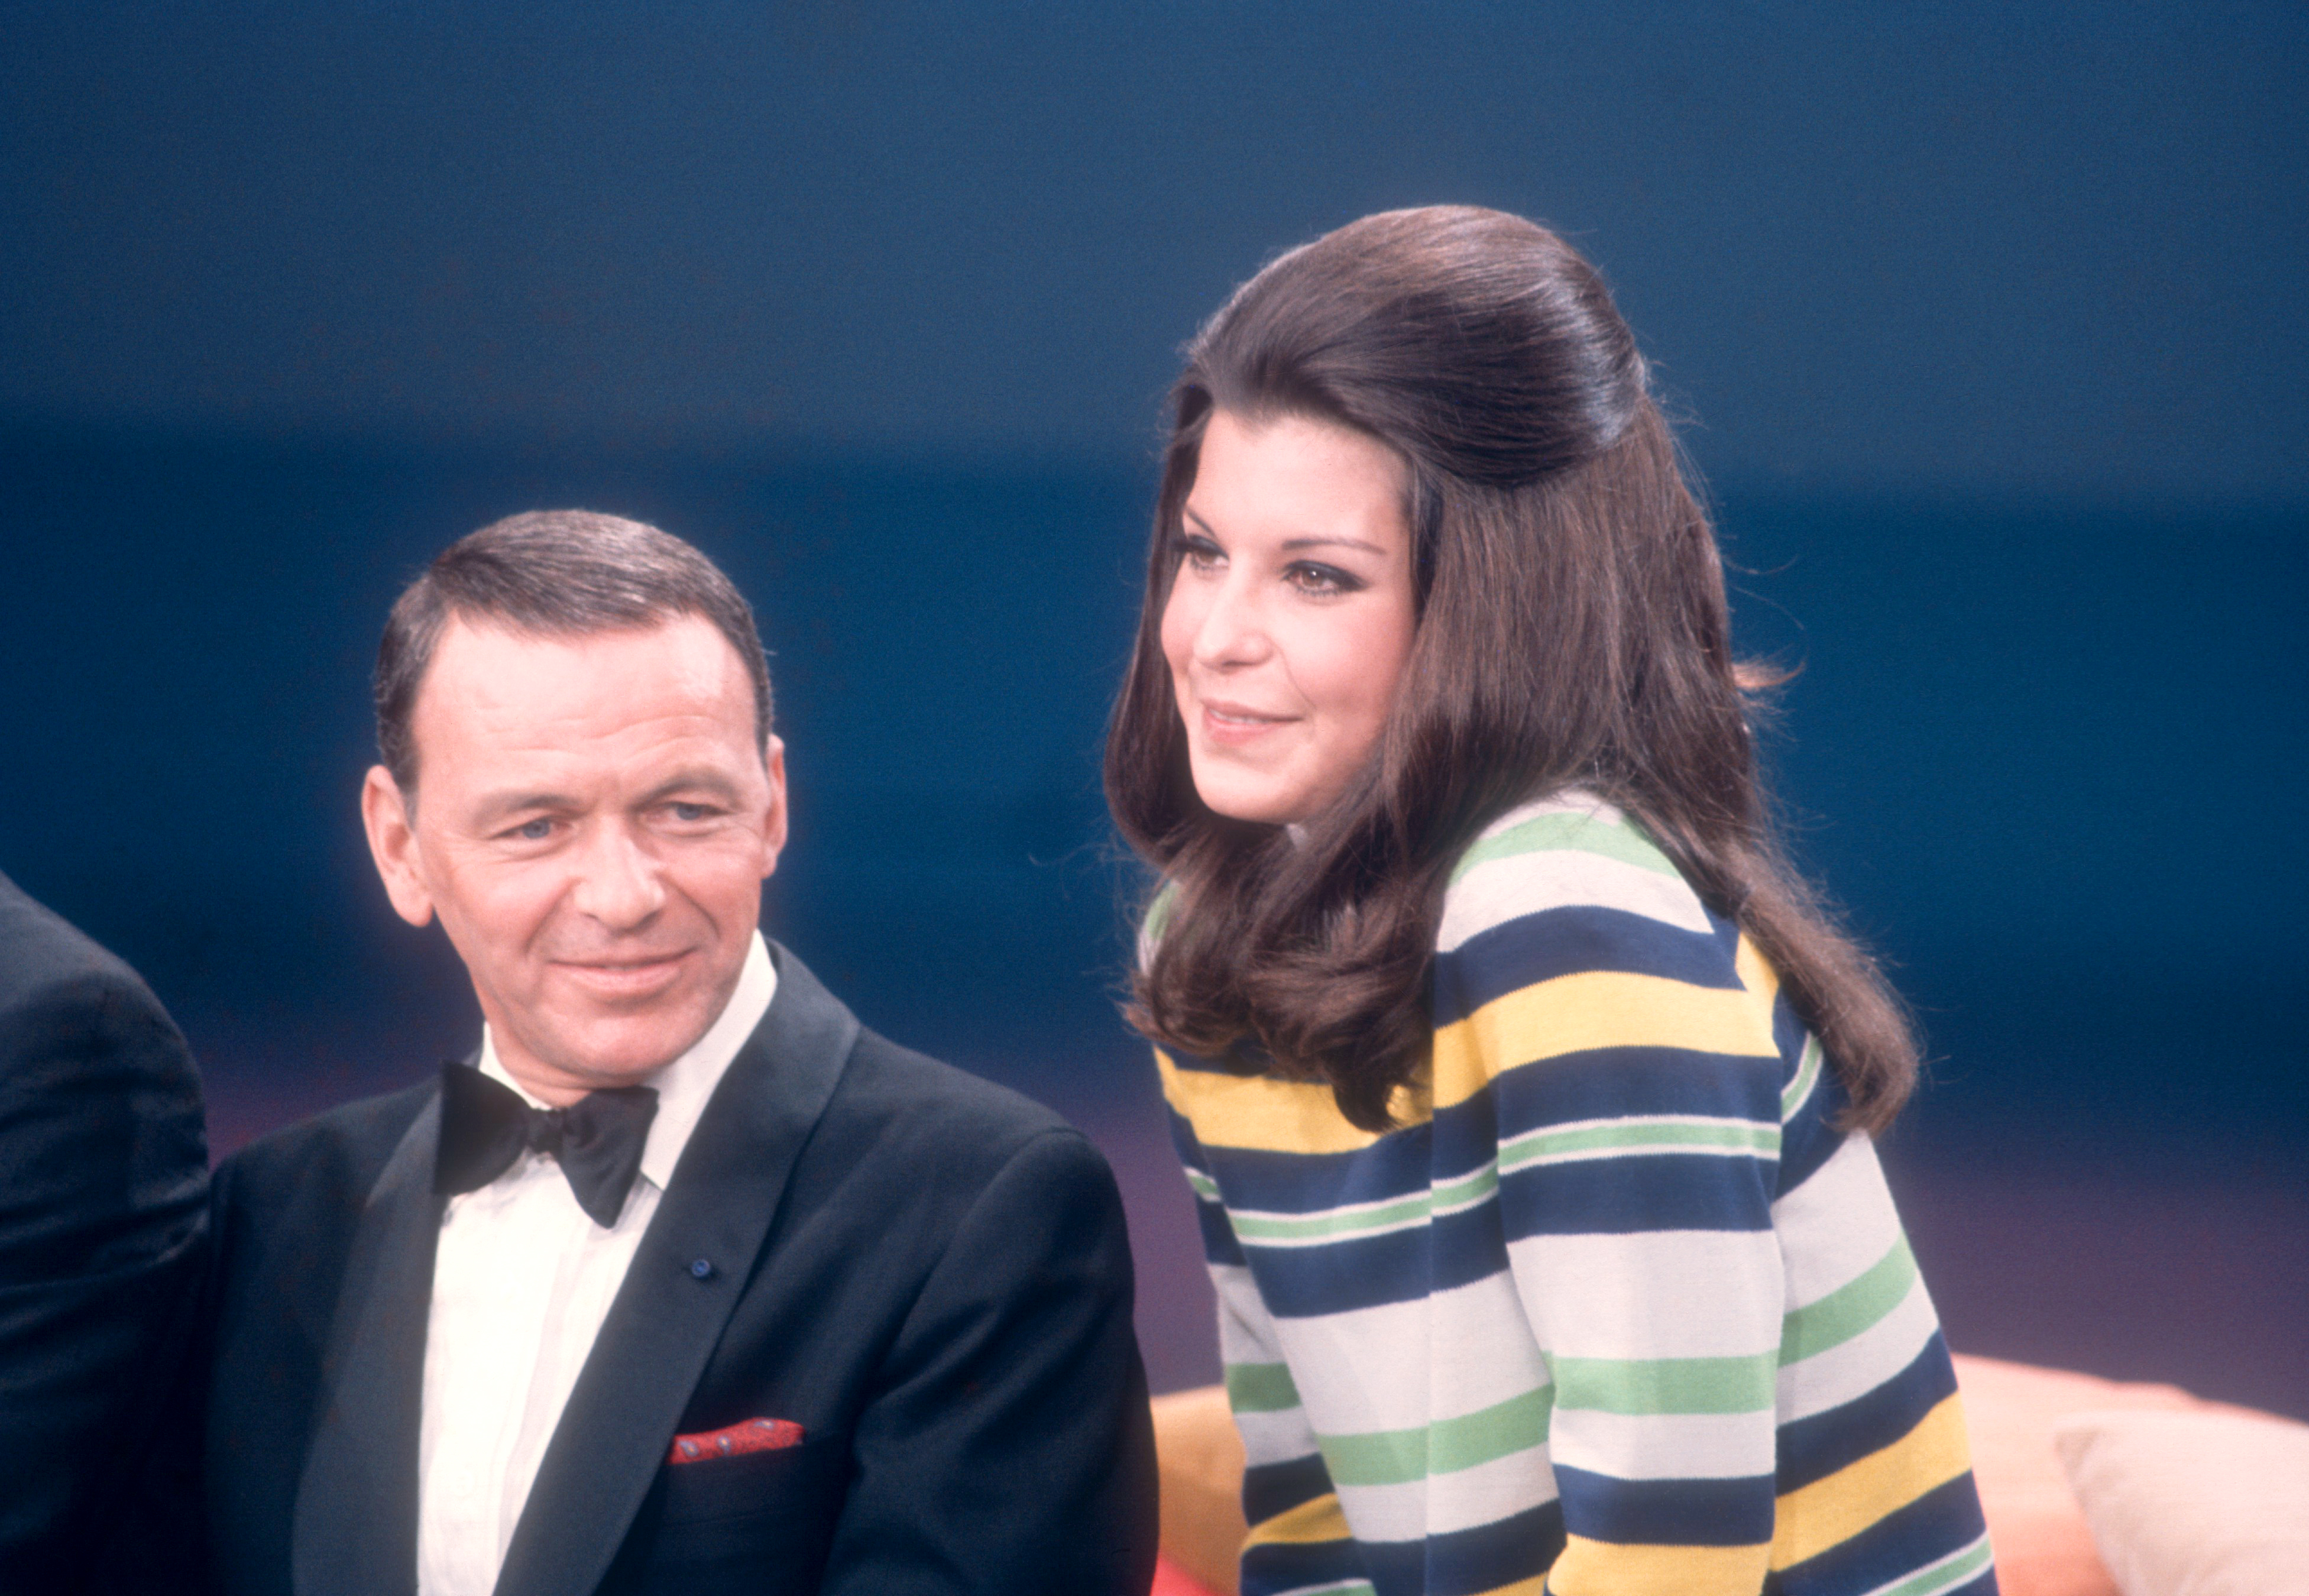 Frank Sinatra and his daughter Tina Sinatra sing during the taping of "The Dean Martin Variety Show" in Hollywood, California, circa 1967 | Source: Getty Images